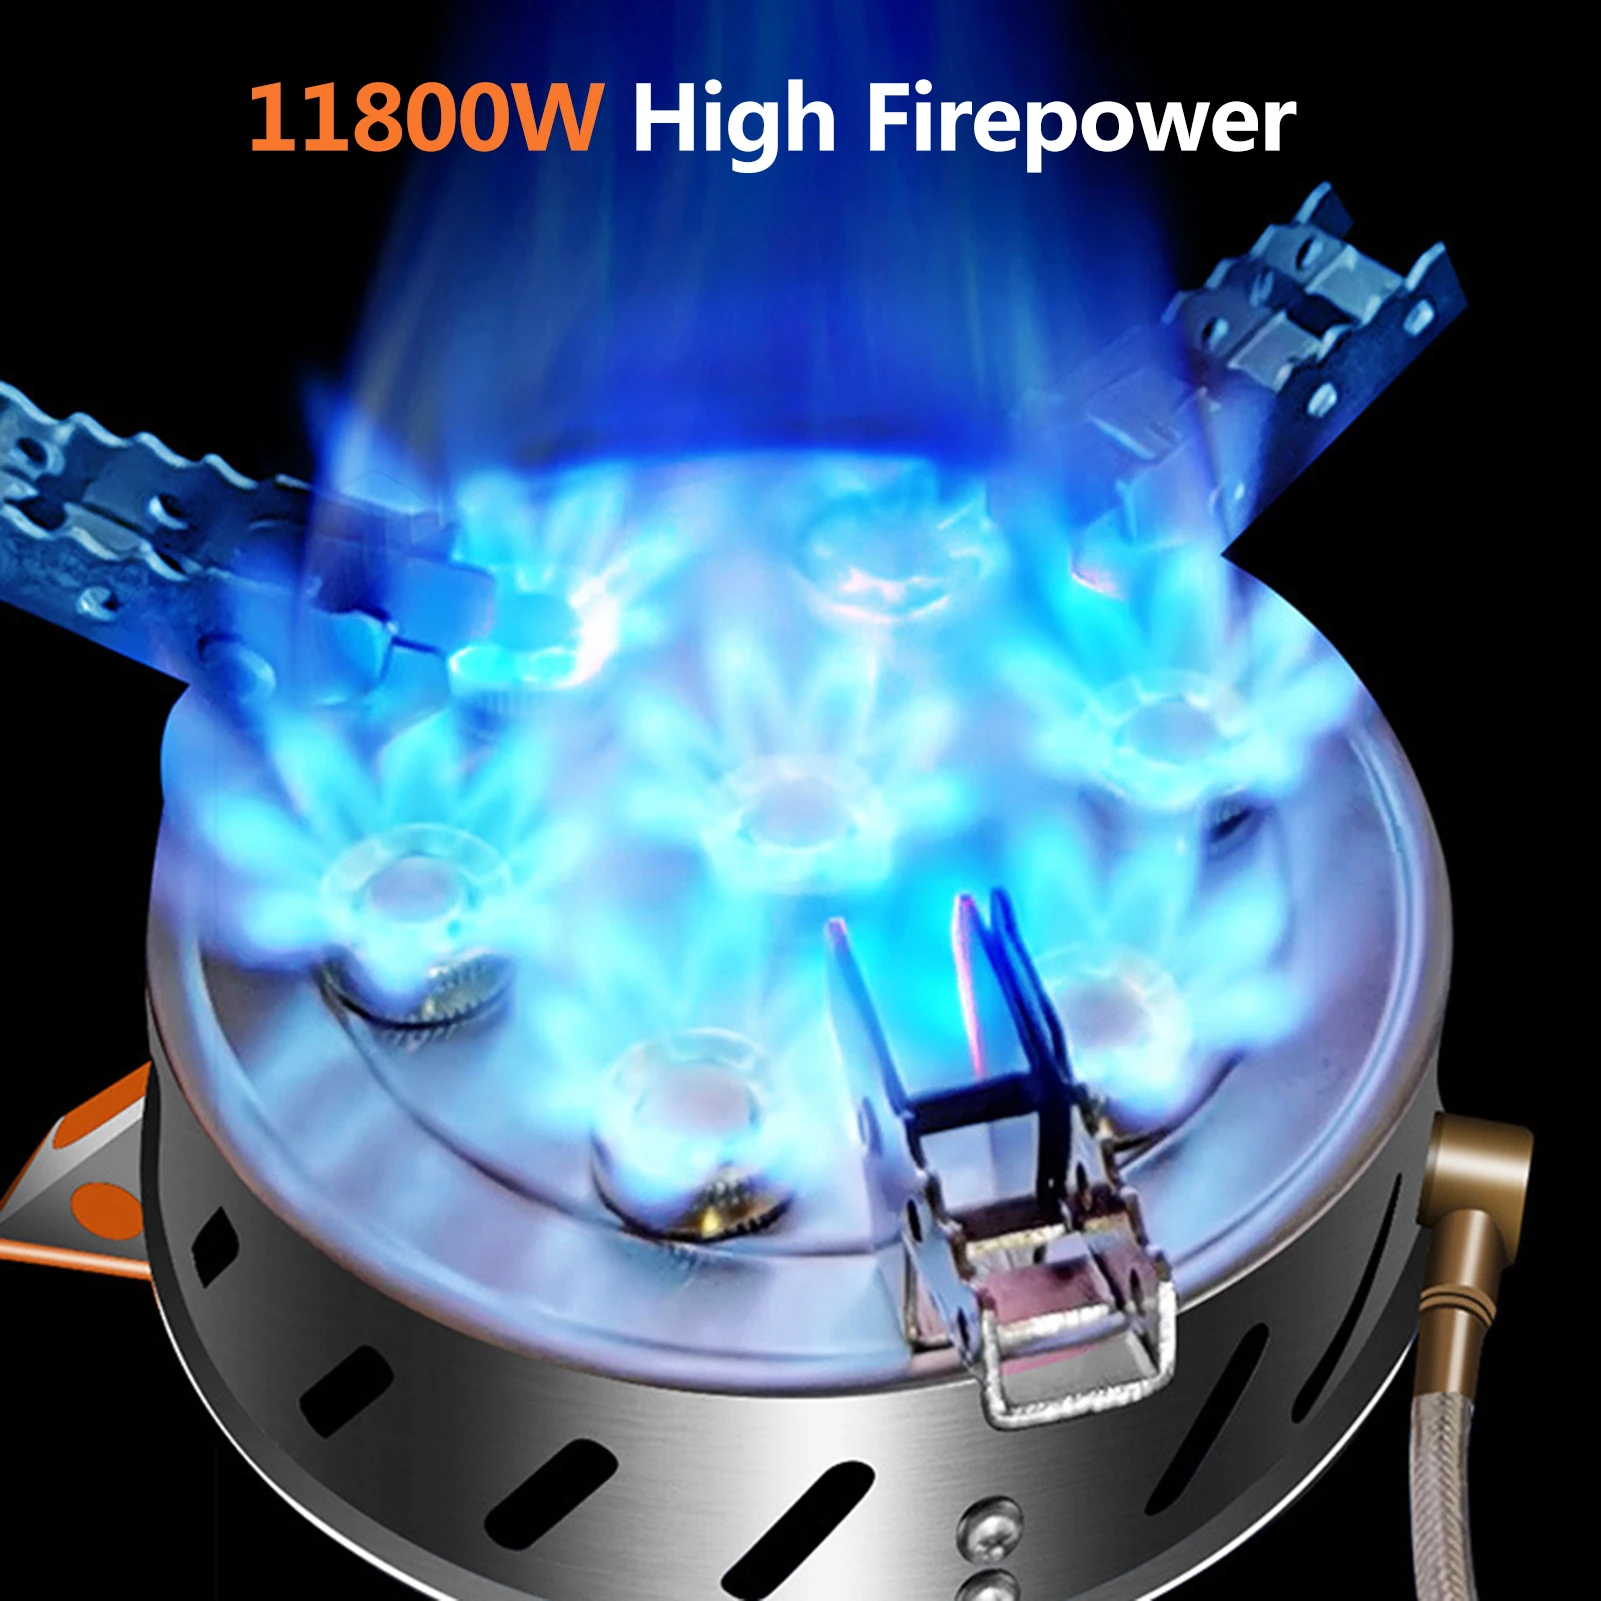 

12800W 7-Head Outdoor Stove Self-Driving Tour Stainless Steel Folding 9 Hole Fire Brimstone Stoves Gas Burner Camping Equipment